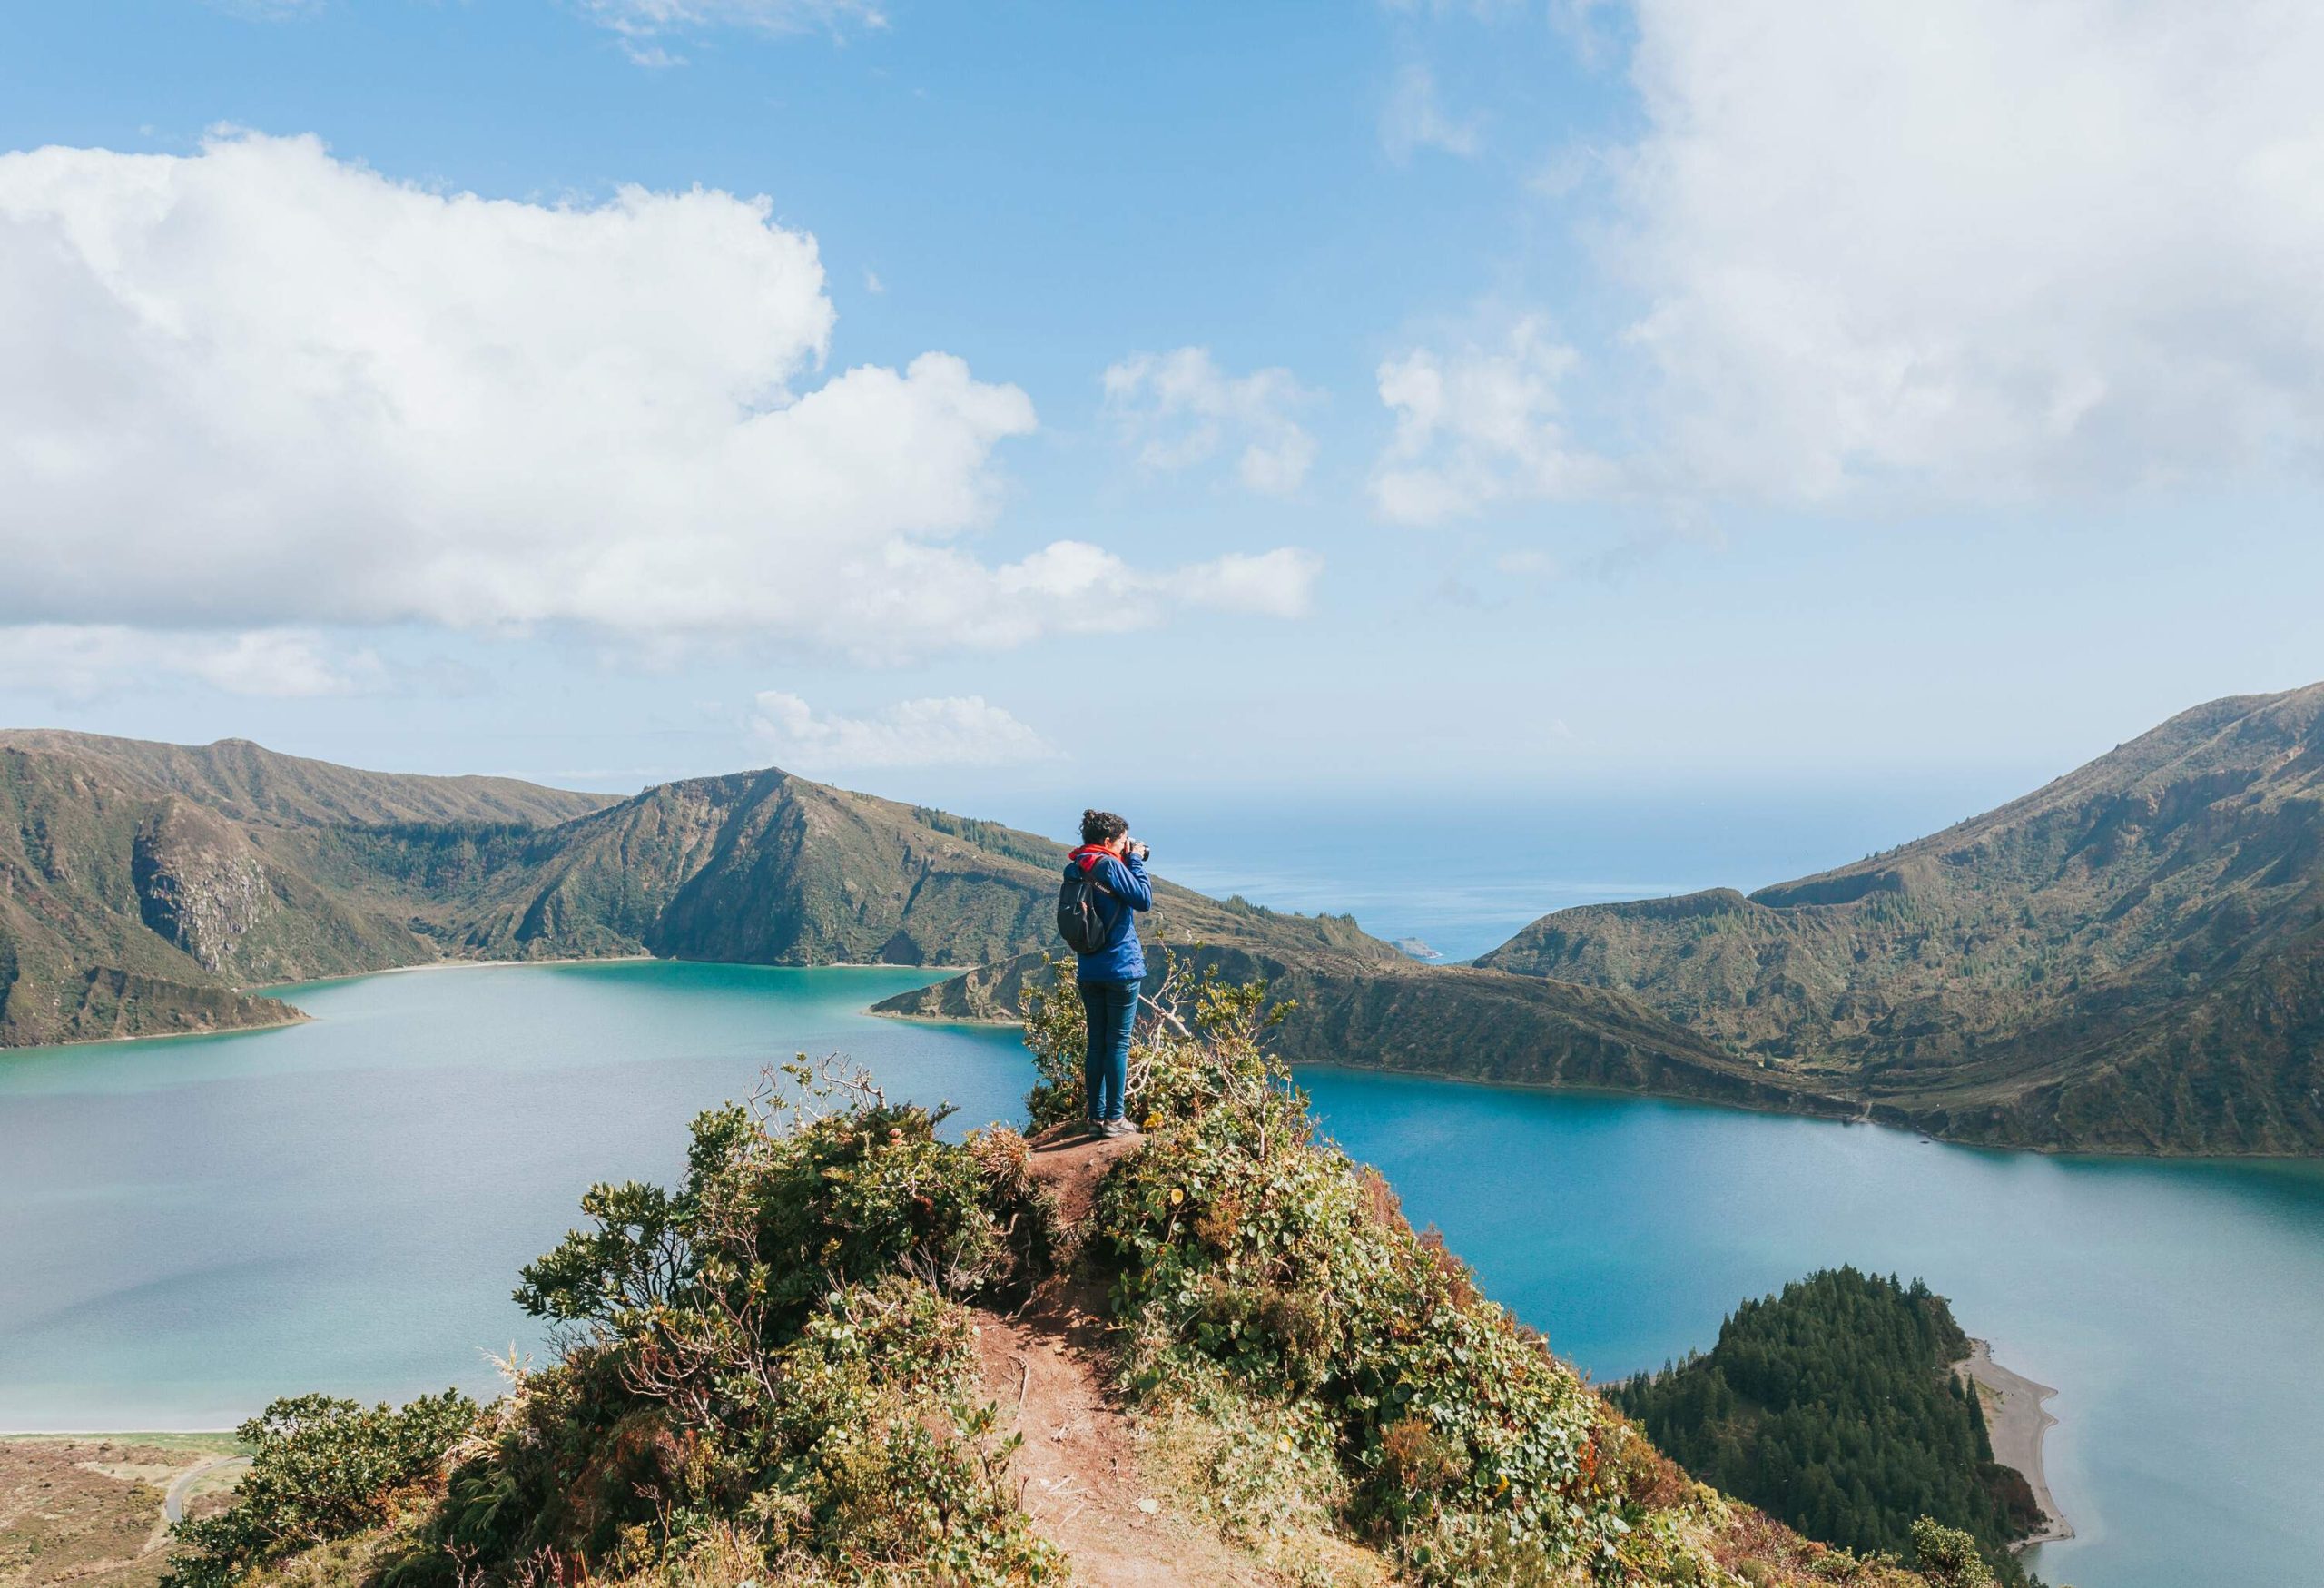 A person stands on a narrow cliff to take a photo of a turquoise lake surrounded by mountains.